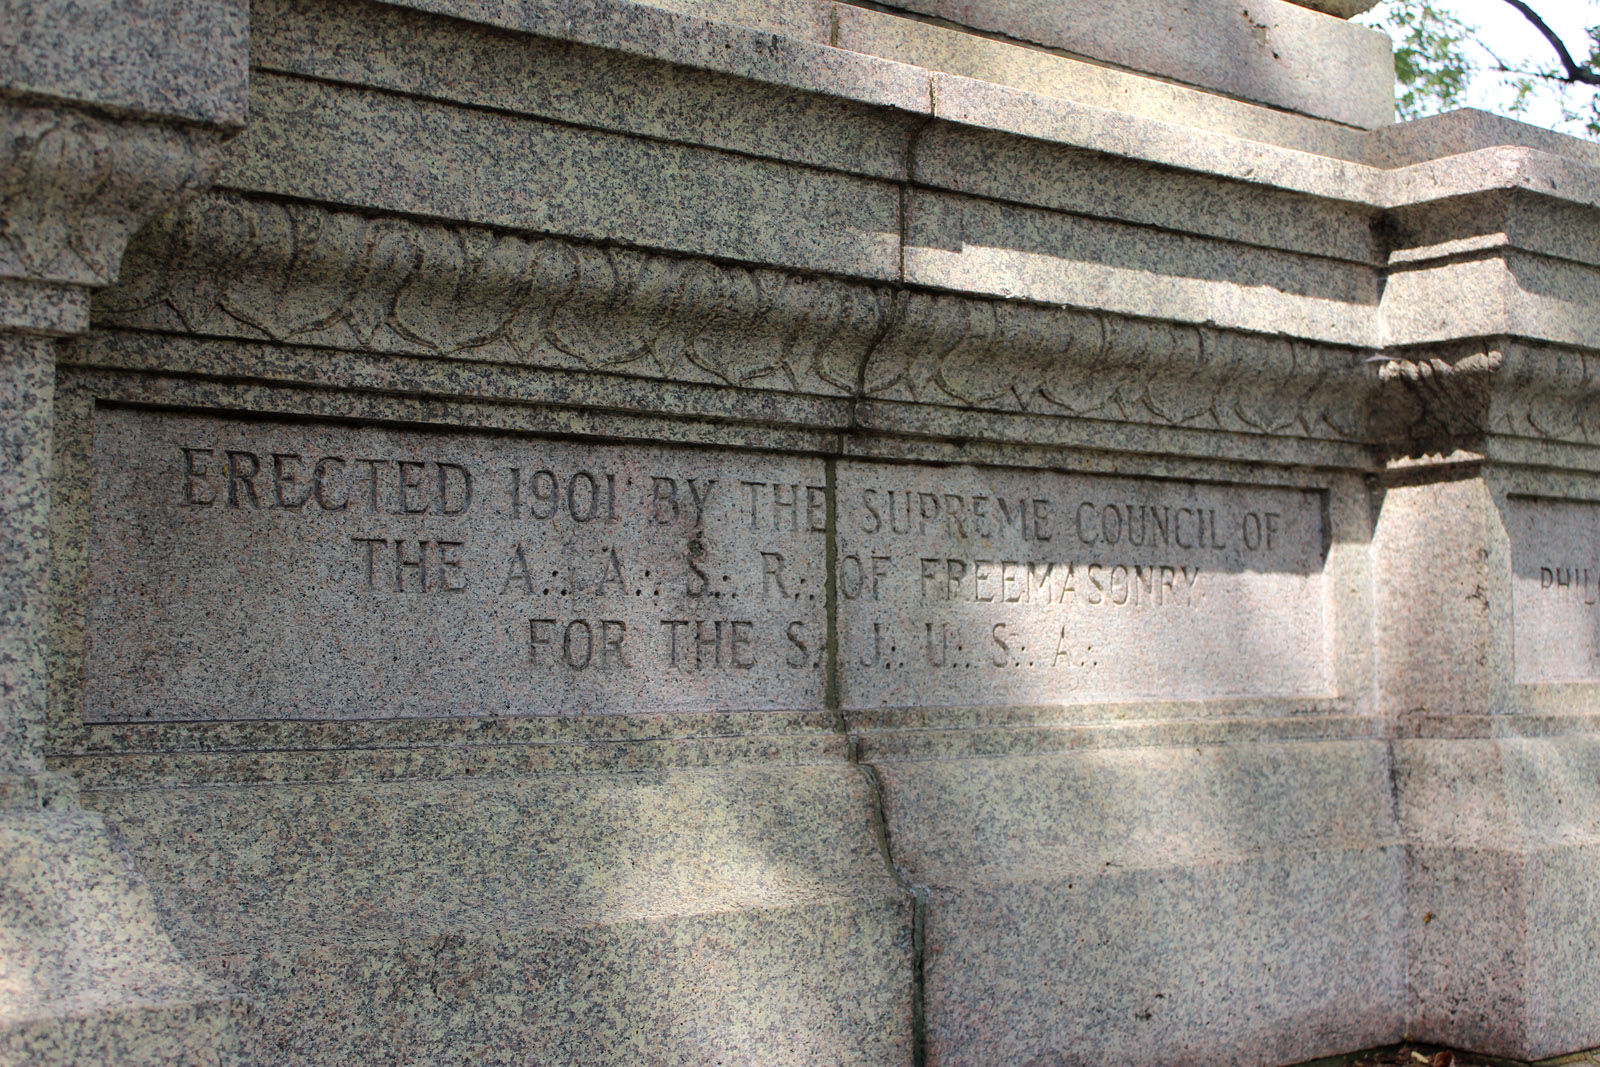 The inscription reads: Erected 1901 by the Supreme Council of the A.A. S.R. of Freemasonry for the S.J.U.S.A. (WTOP/Amanda Iacone)